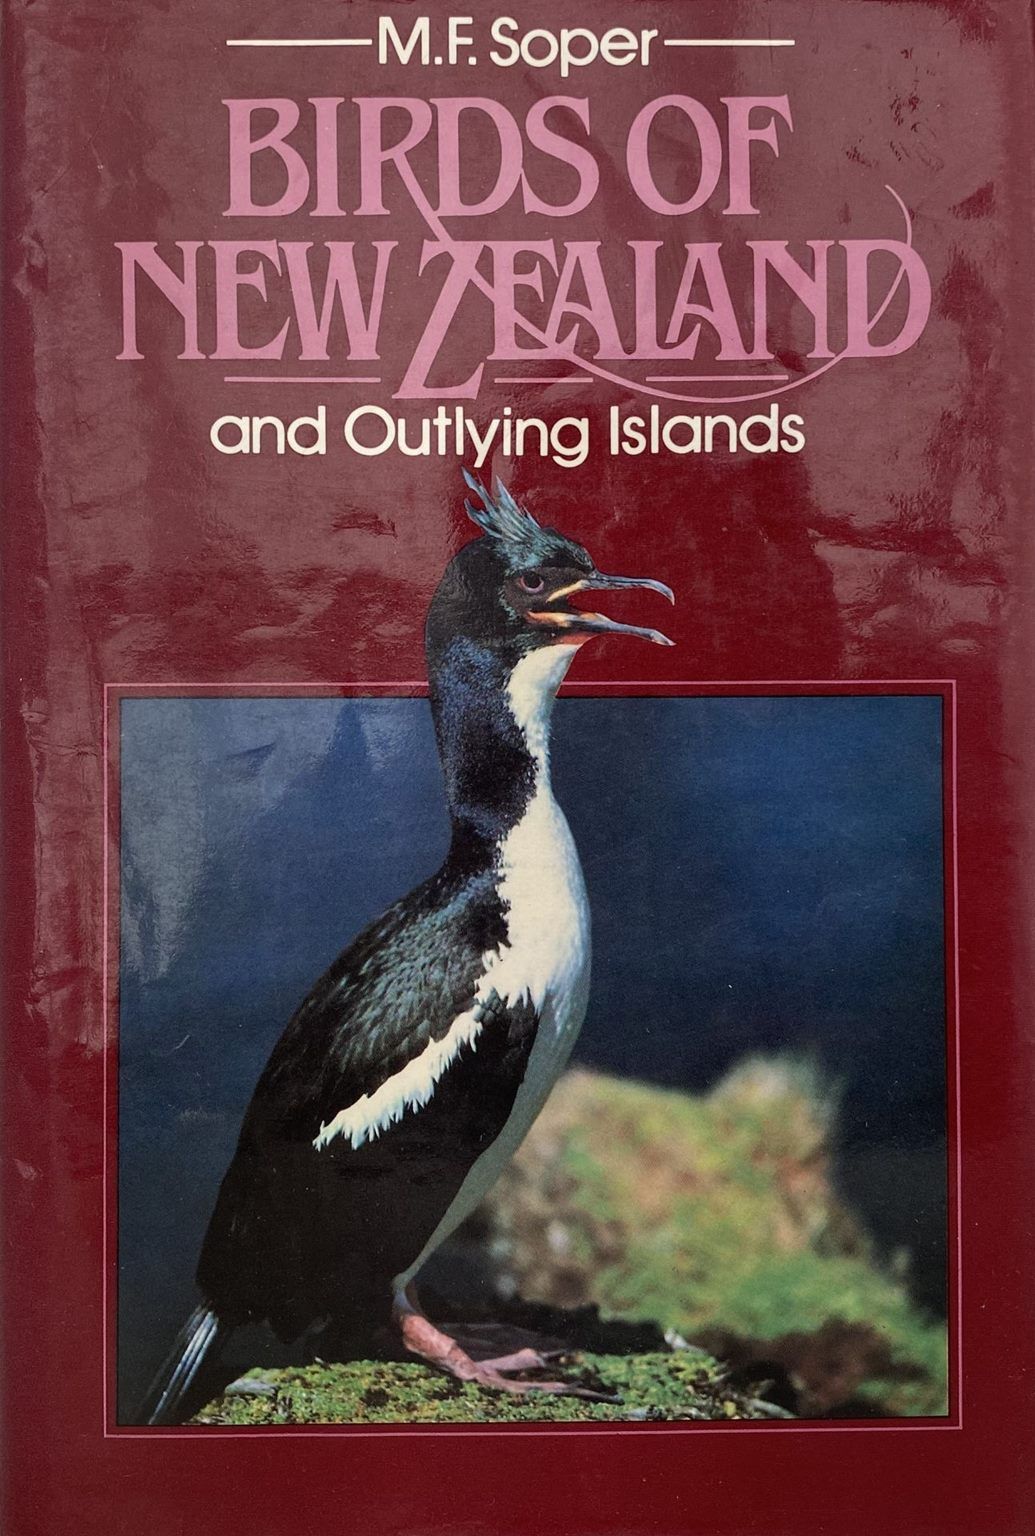 BIRDS OF NEW ZEALAND and Outlying Islands